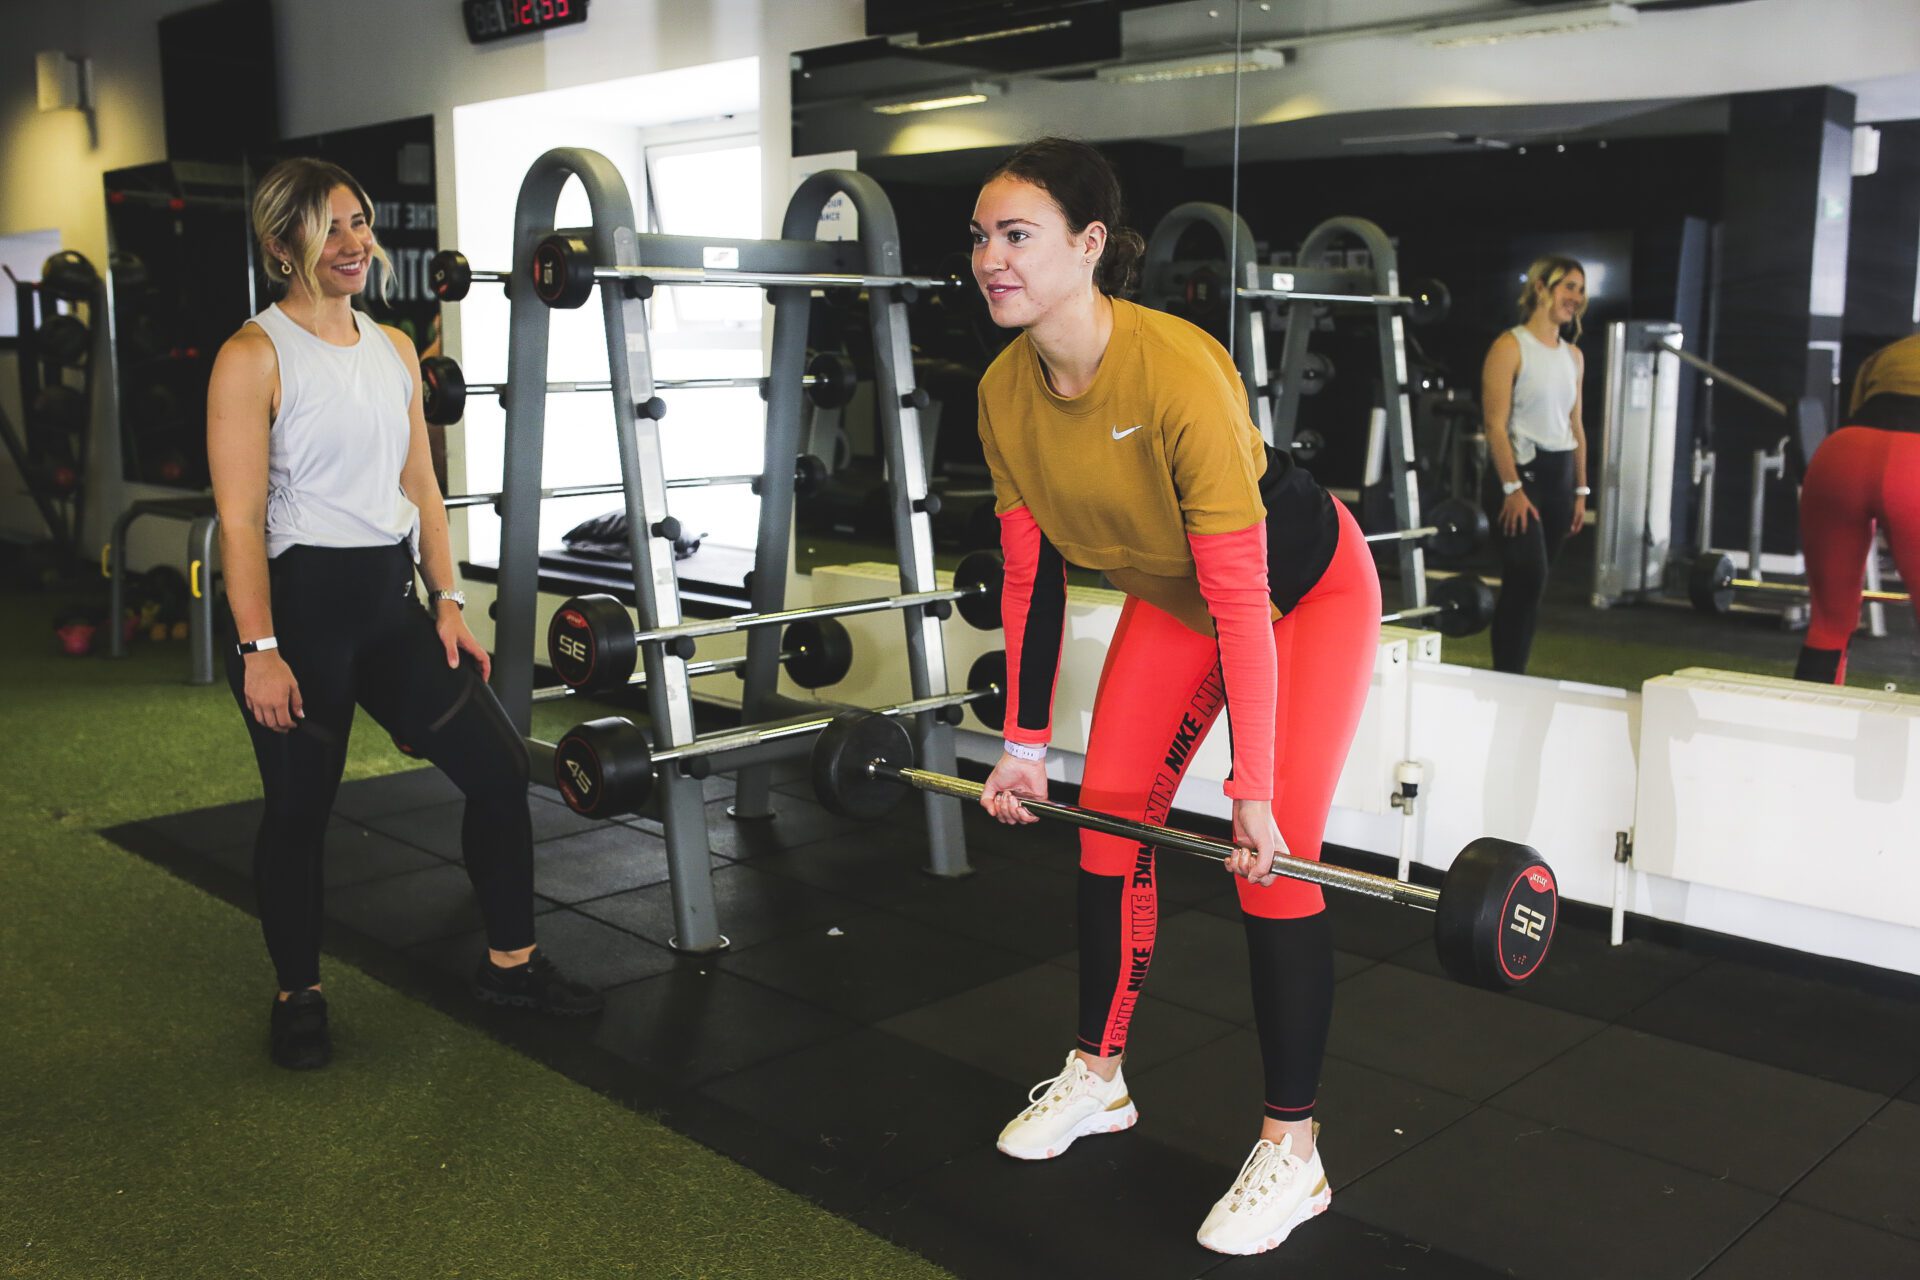 Level 4 Personal Training Courses